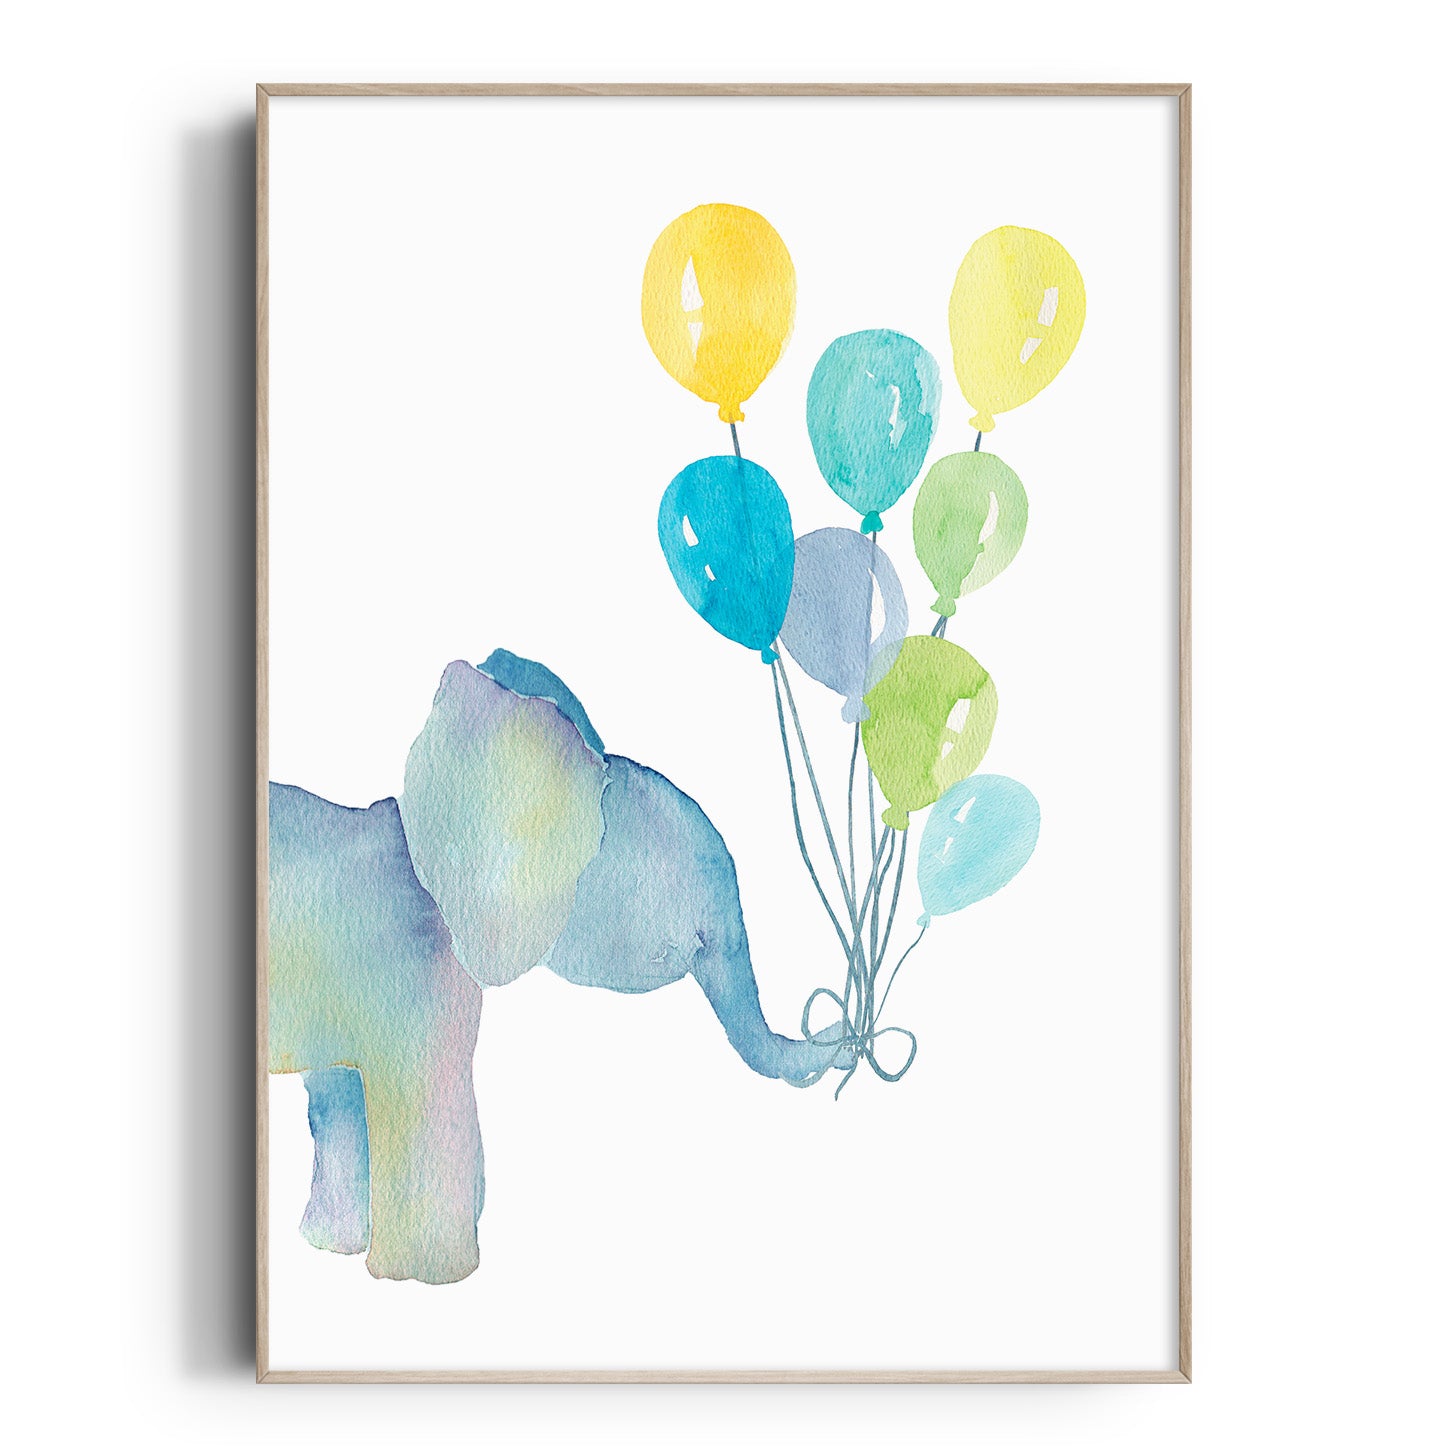 Watercolour Elephant with Balloons Print